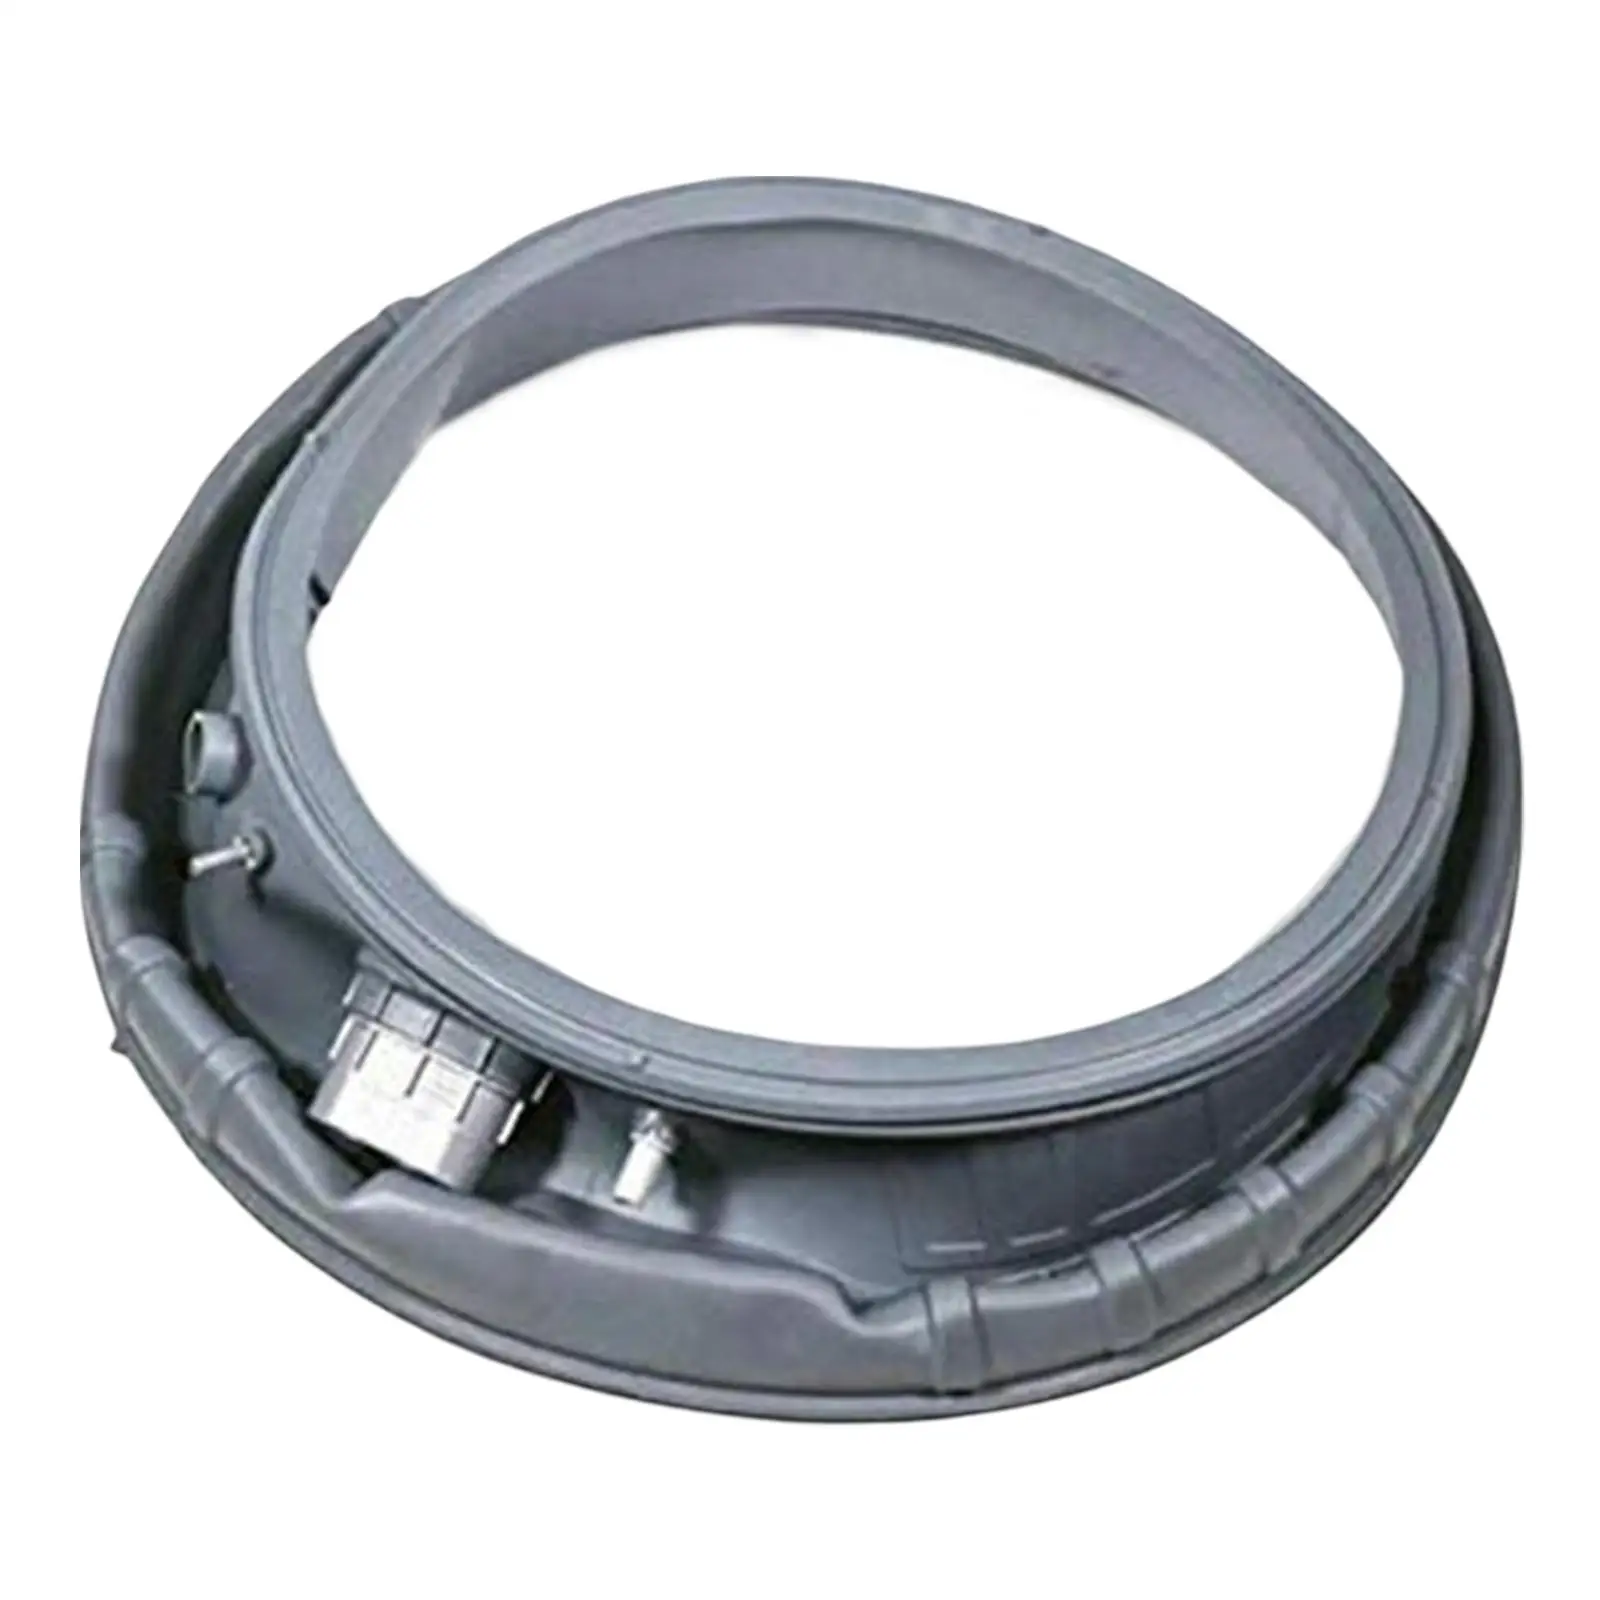 Round Door Boot Gasket Gum Material for Samsung Washers DC97-18094B AP5917067 PS9606239 Washer Repairing